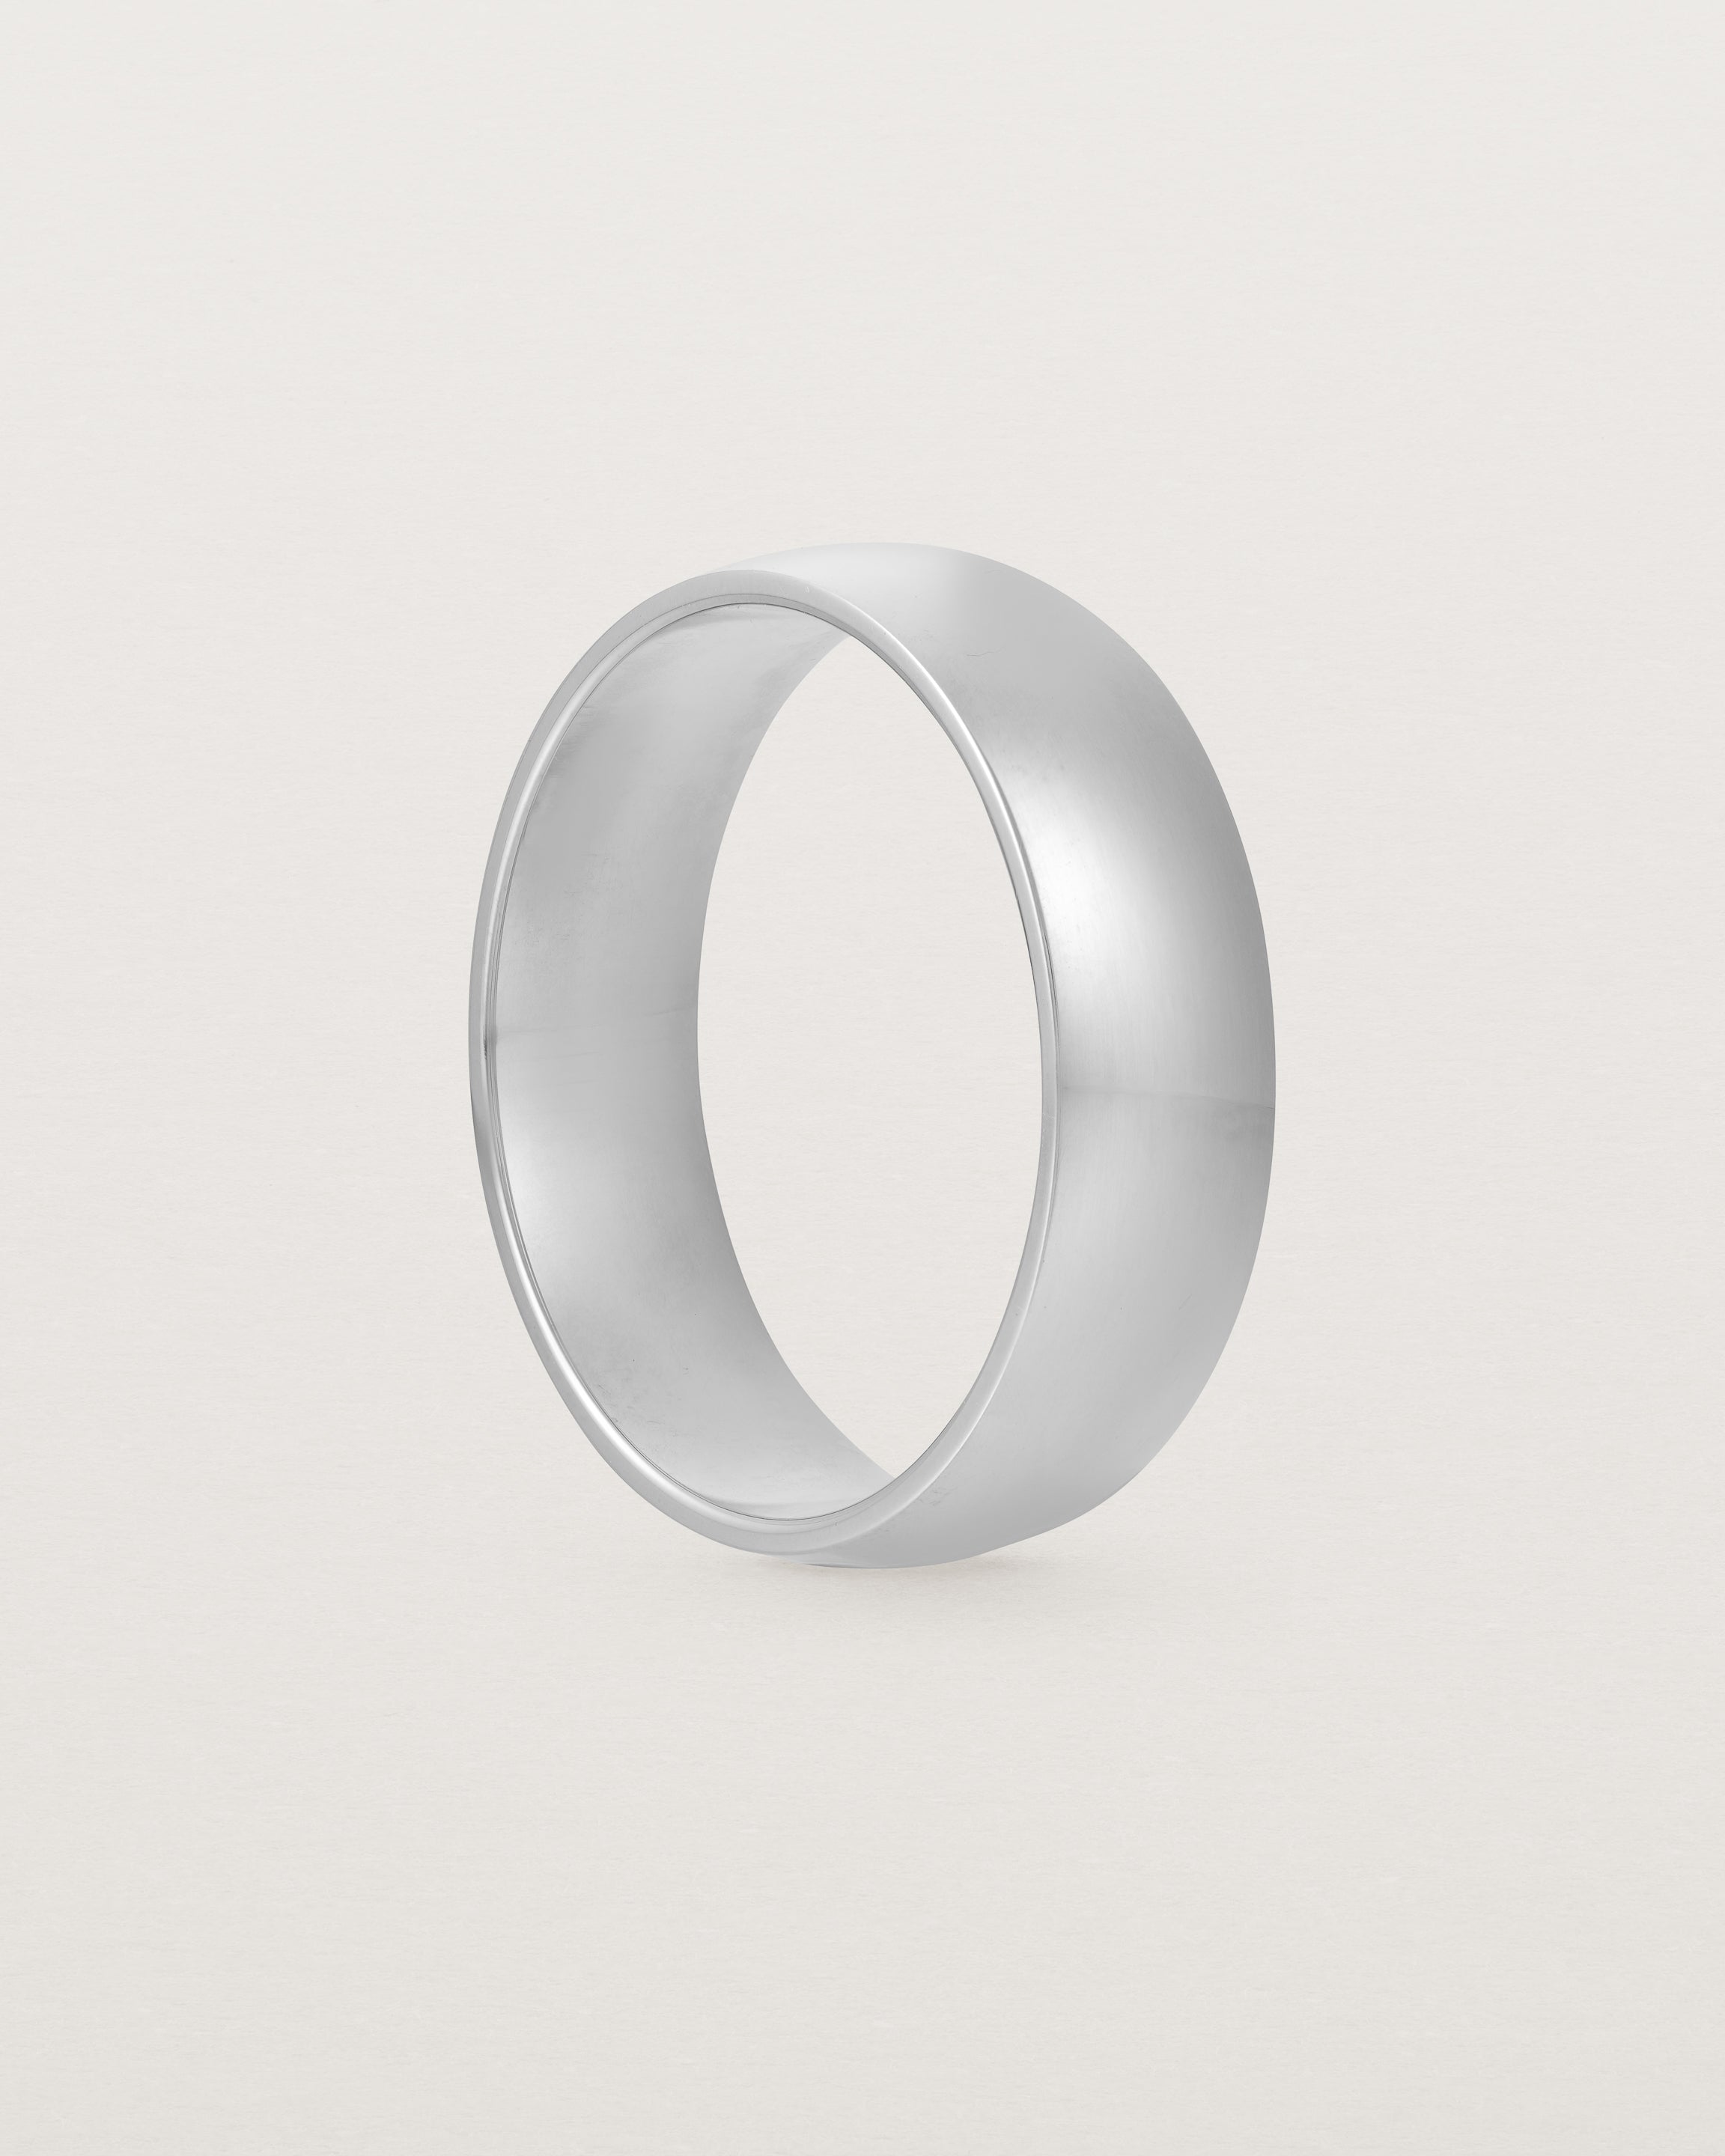 The front view of a heavy 6mm wedding band in sterling silver.